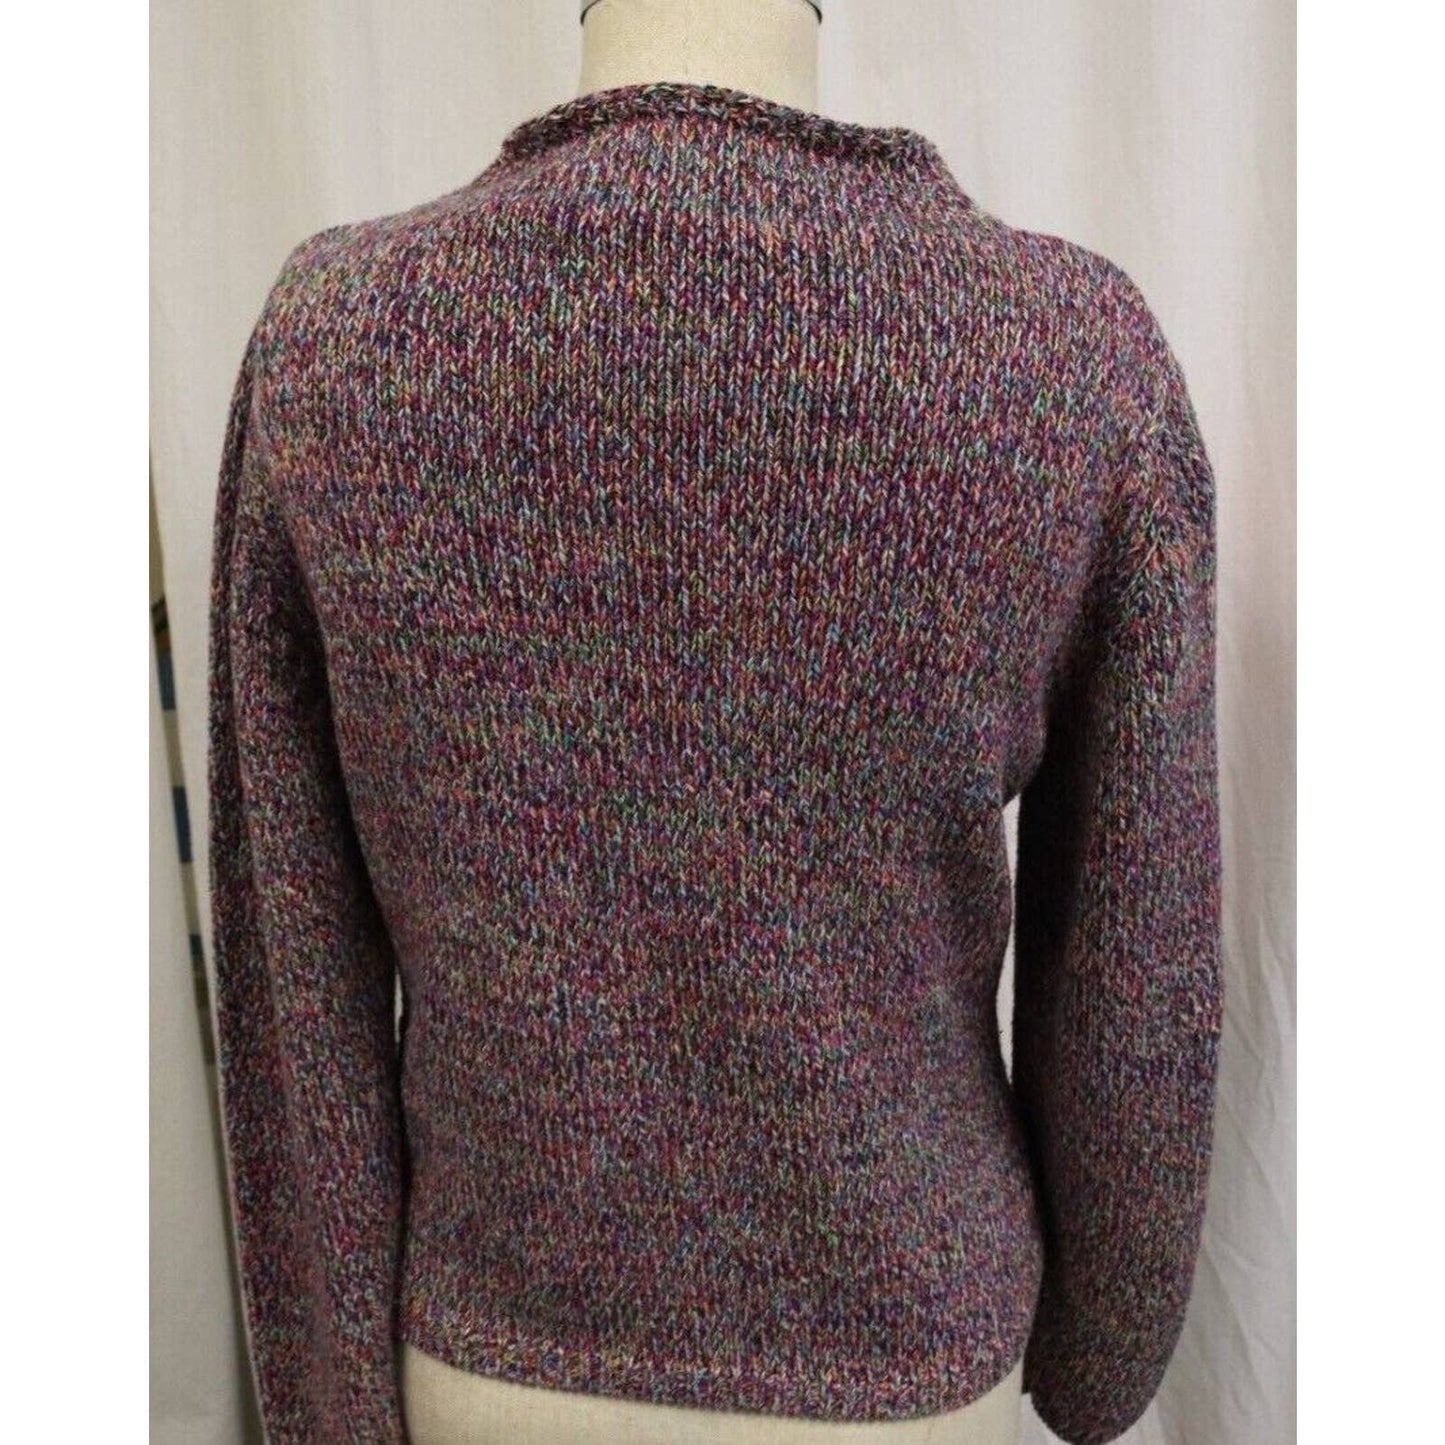 Vintage Knit Liz Claiborne Sweater with a Mock Neck and Long Sleeves